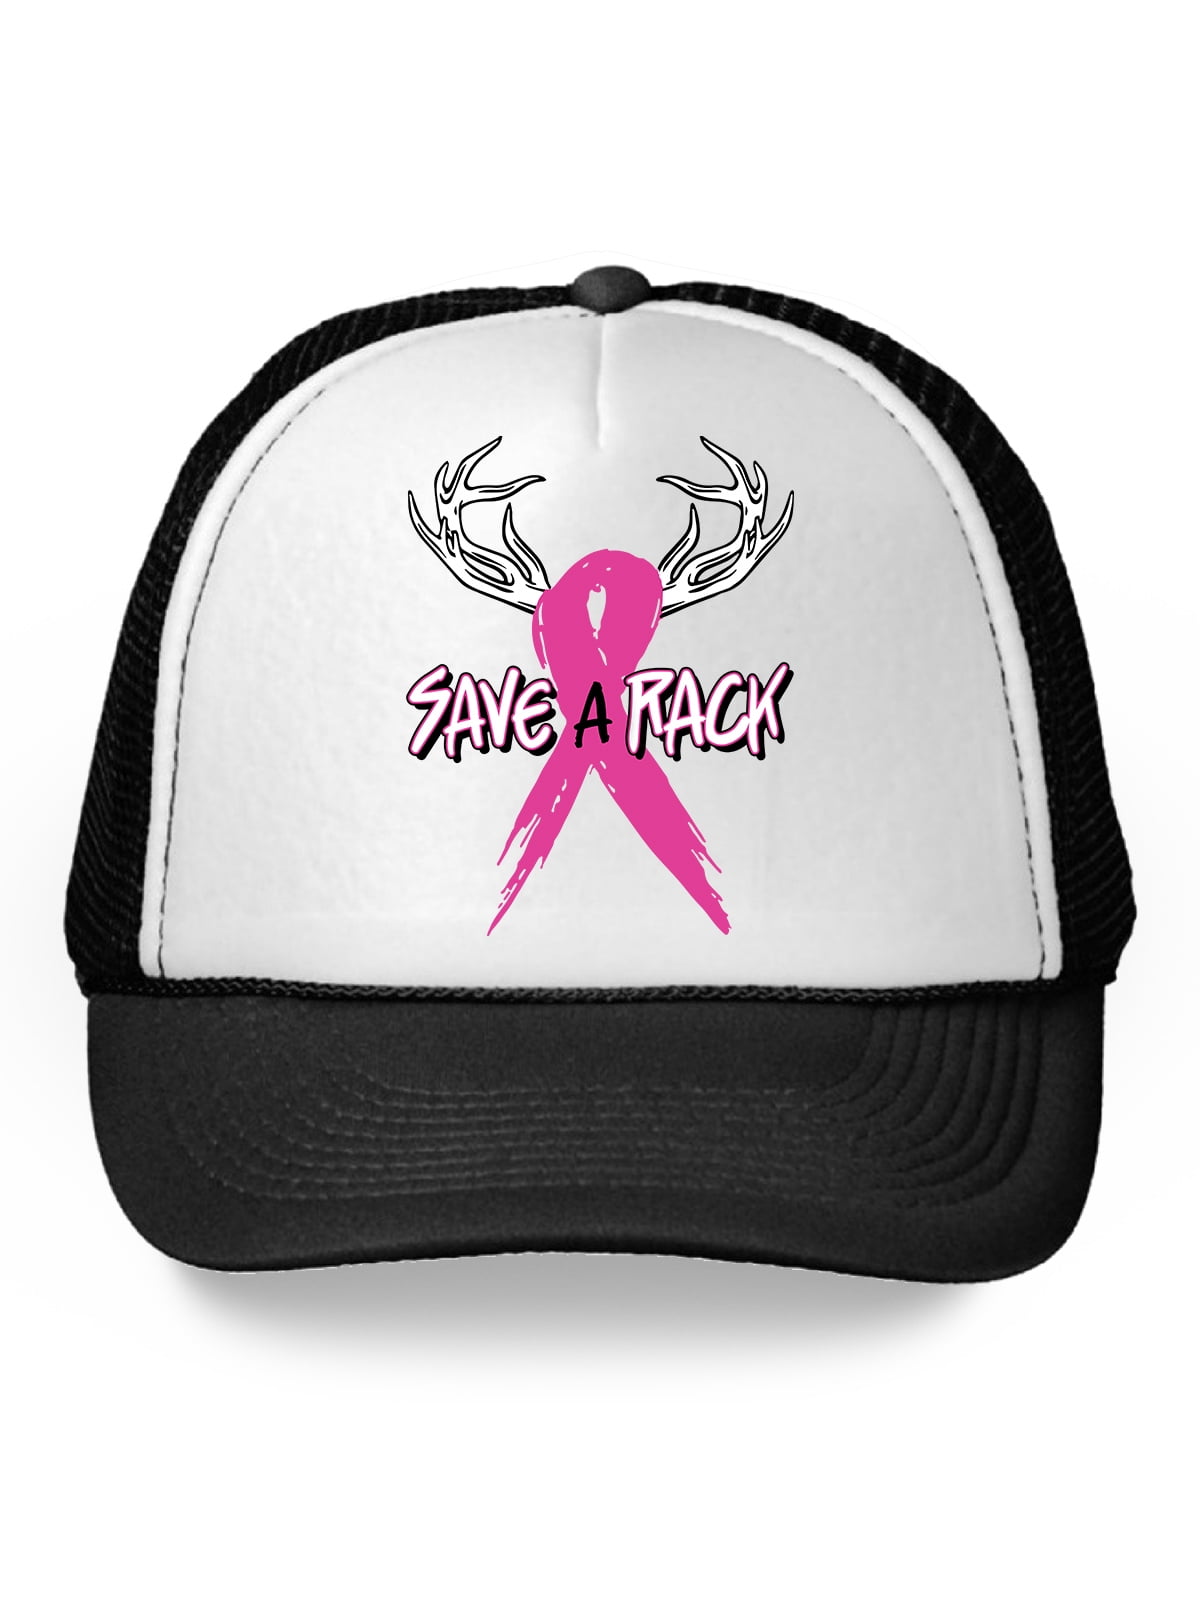 Fabricated in USA 100% Leather - Handmade Unique Pink Ribbon Trucker Breast Cancer Campaign Comfortable Snapback Back Design Hats Pink Color Stoked Hats